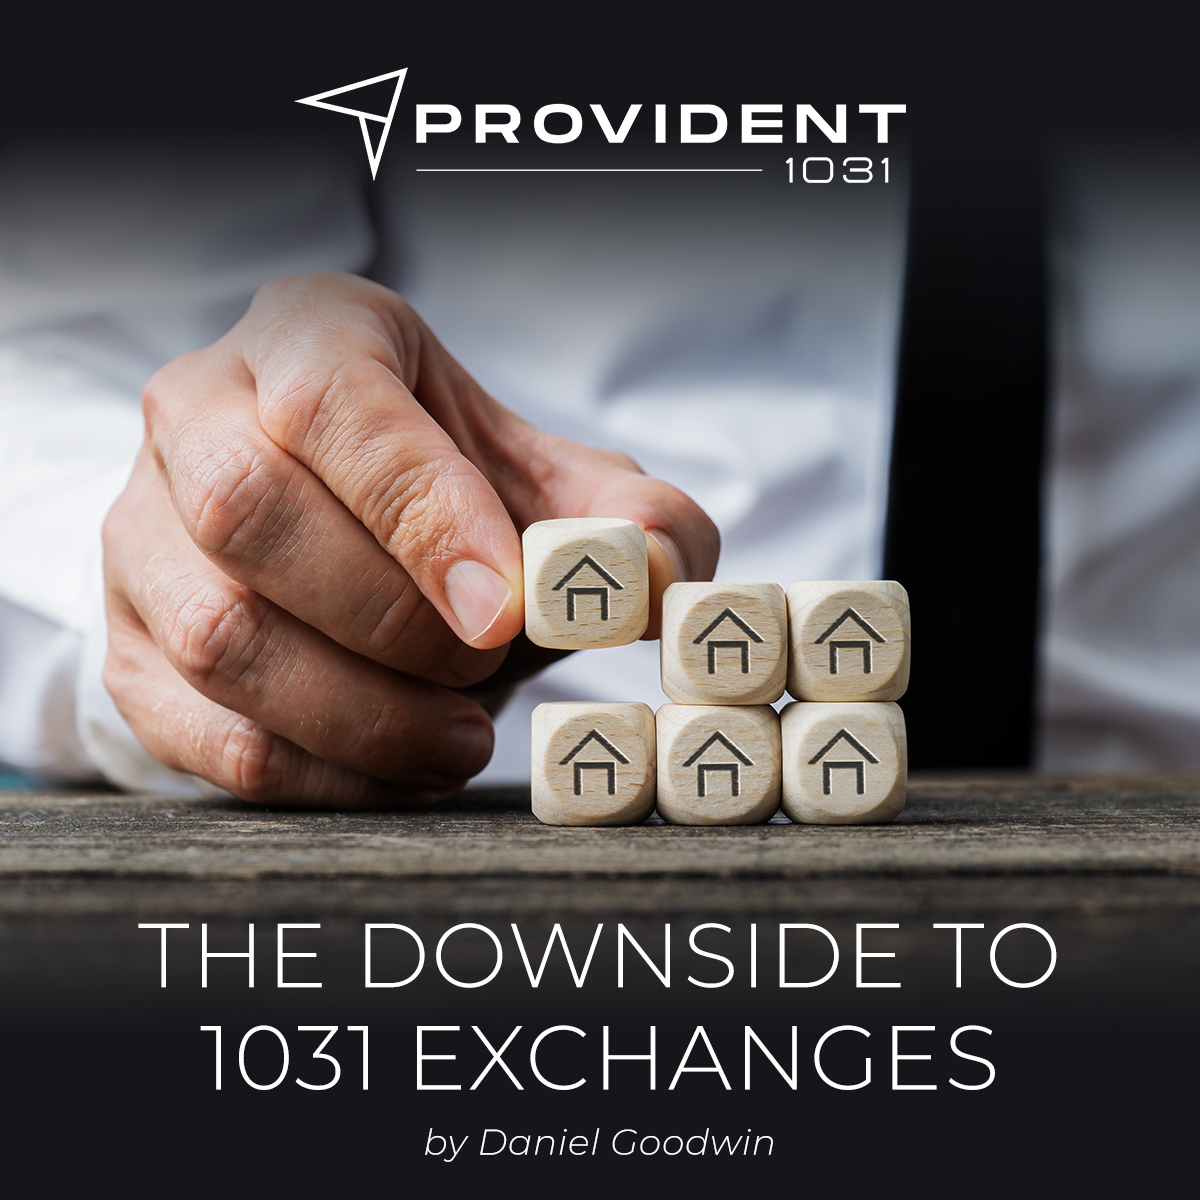 The Downside to 1031 Exchanges by Daniel Goodwin of Provident 1031